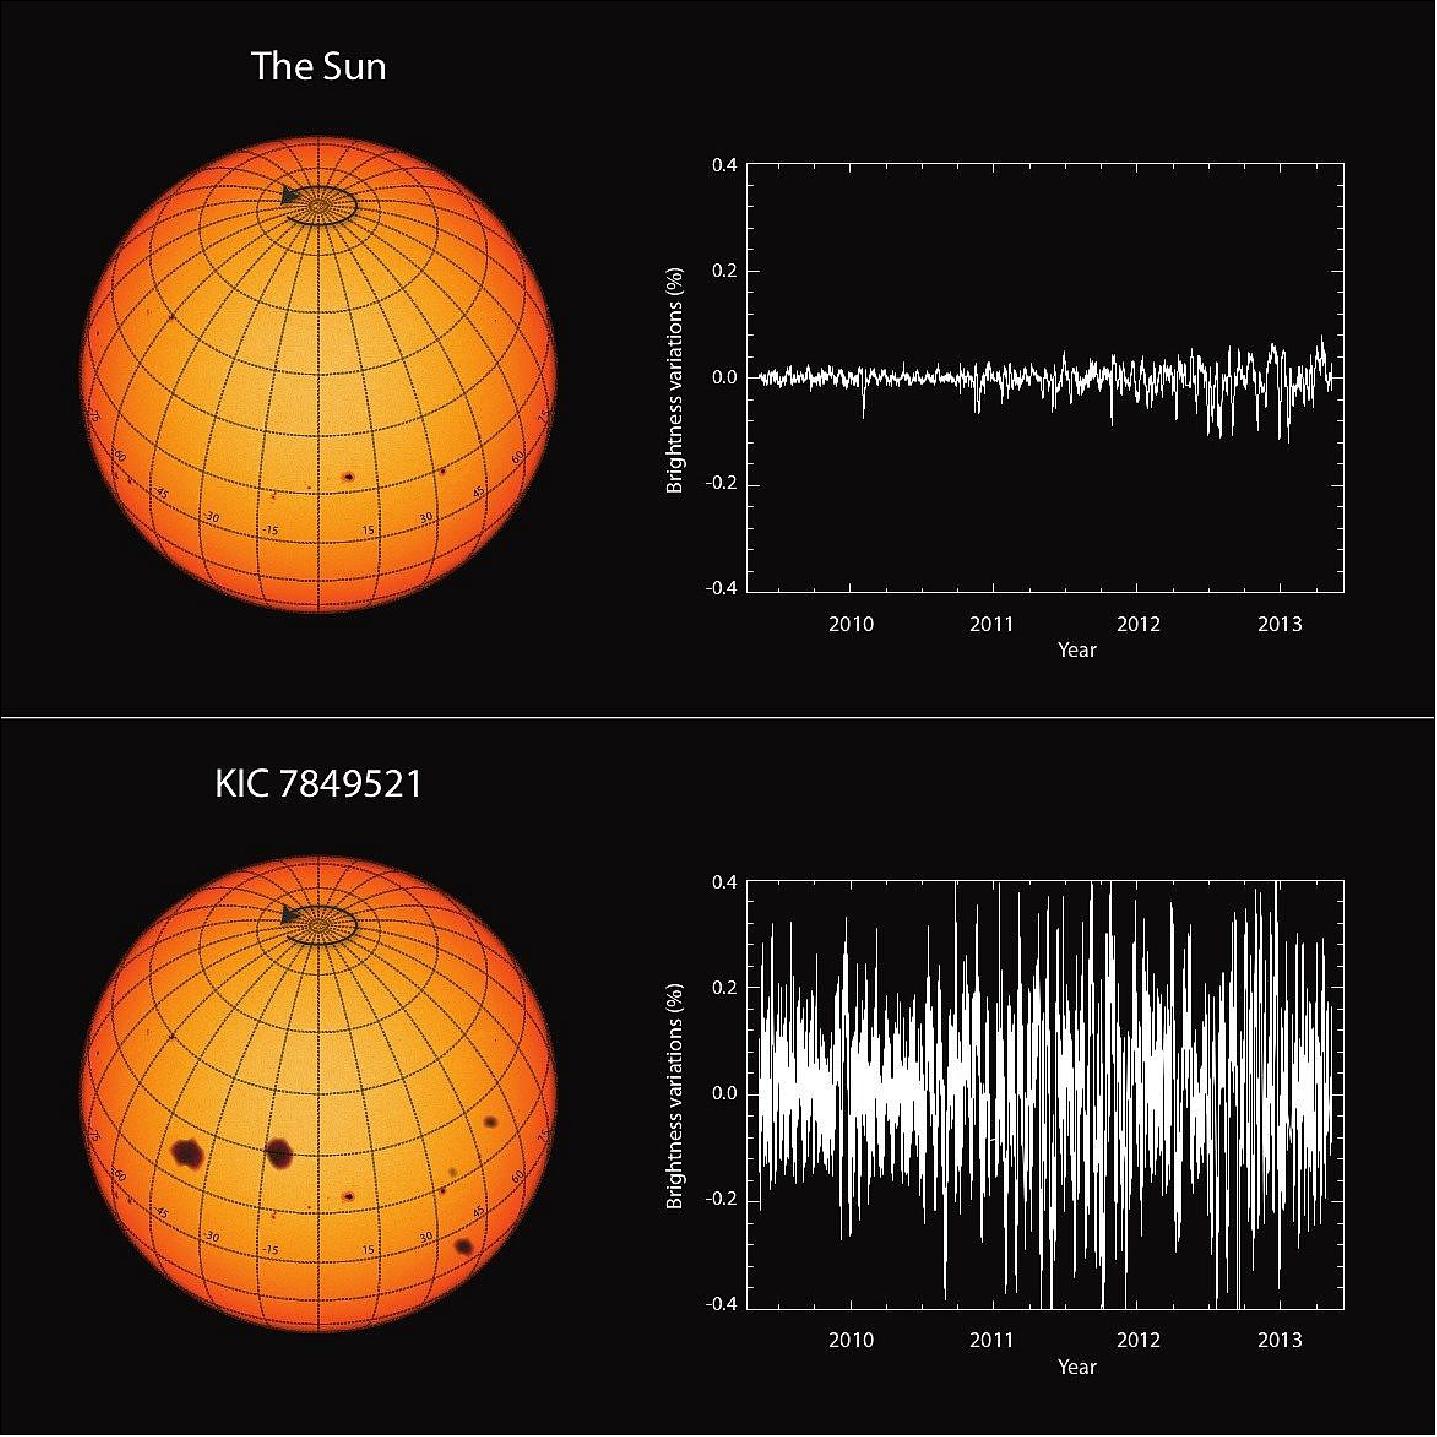 Figure 21: Not very active: comparison of the brightness variations of the Sun with those of a typical Sun-like star (image credit: MPS / hormesdesign.de)